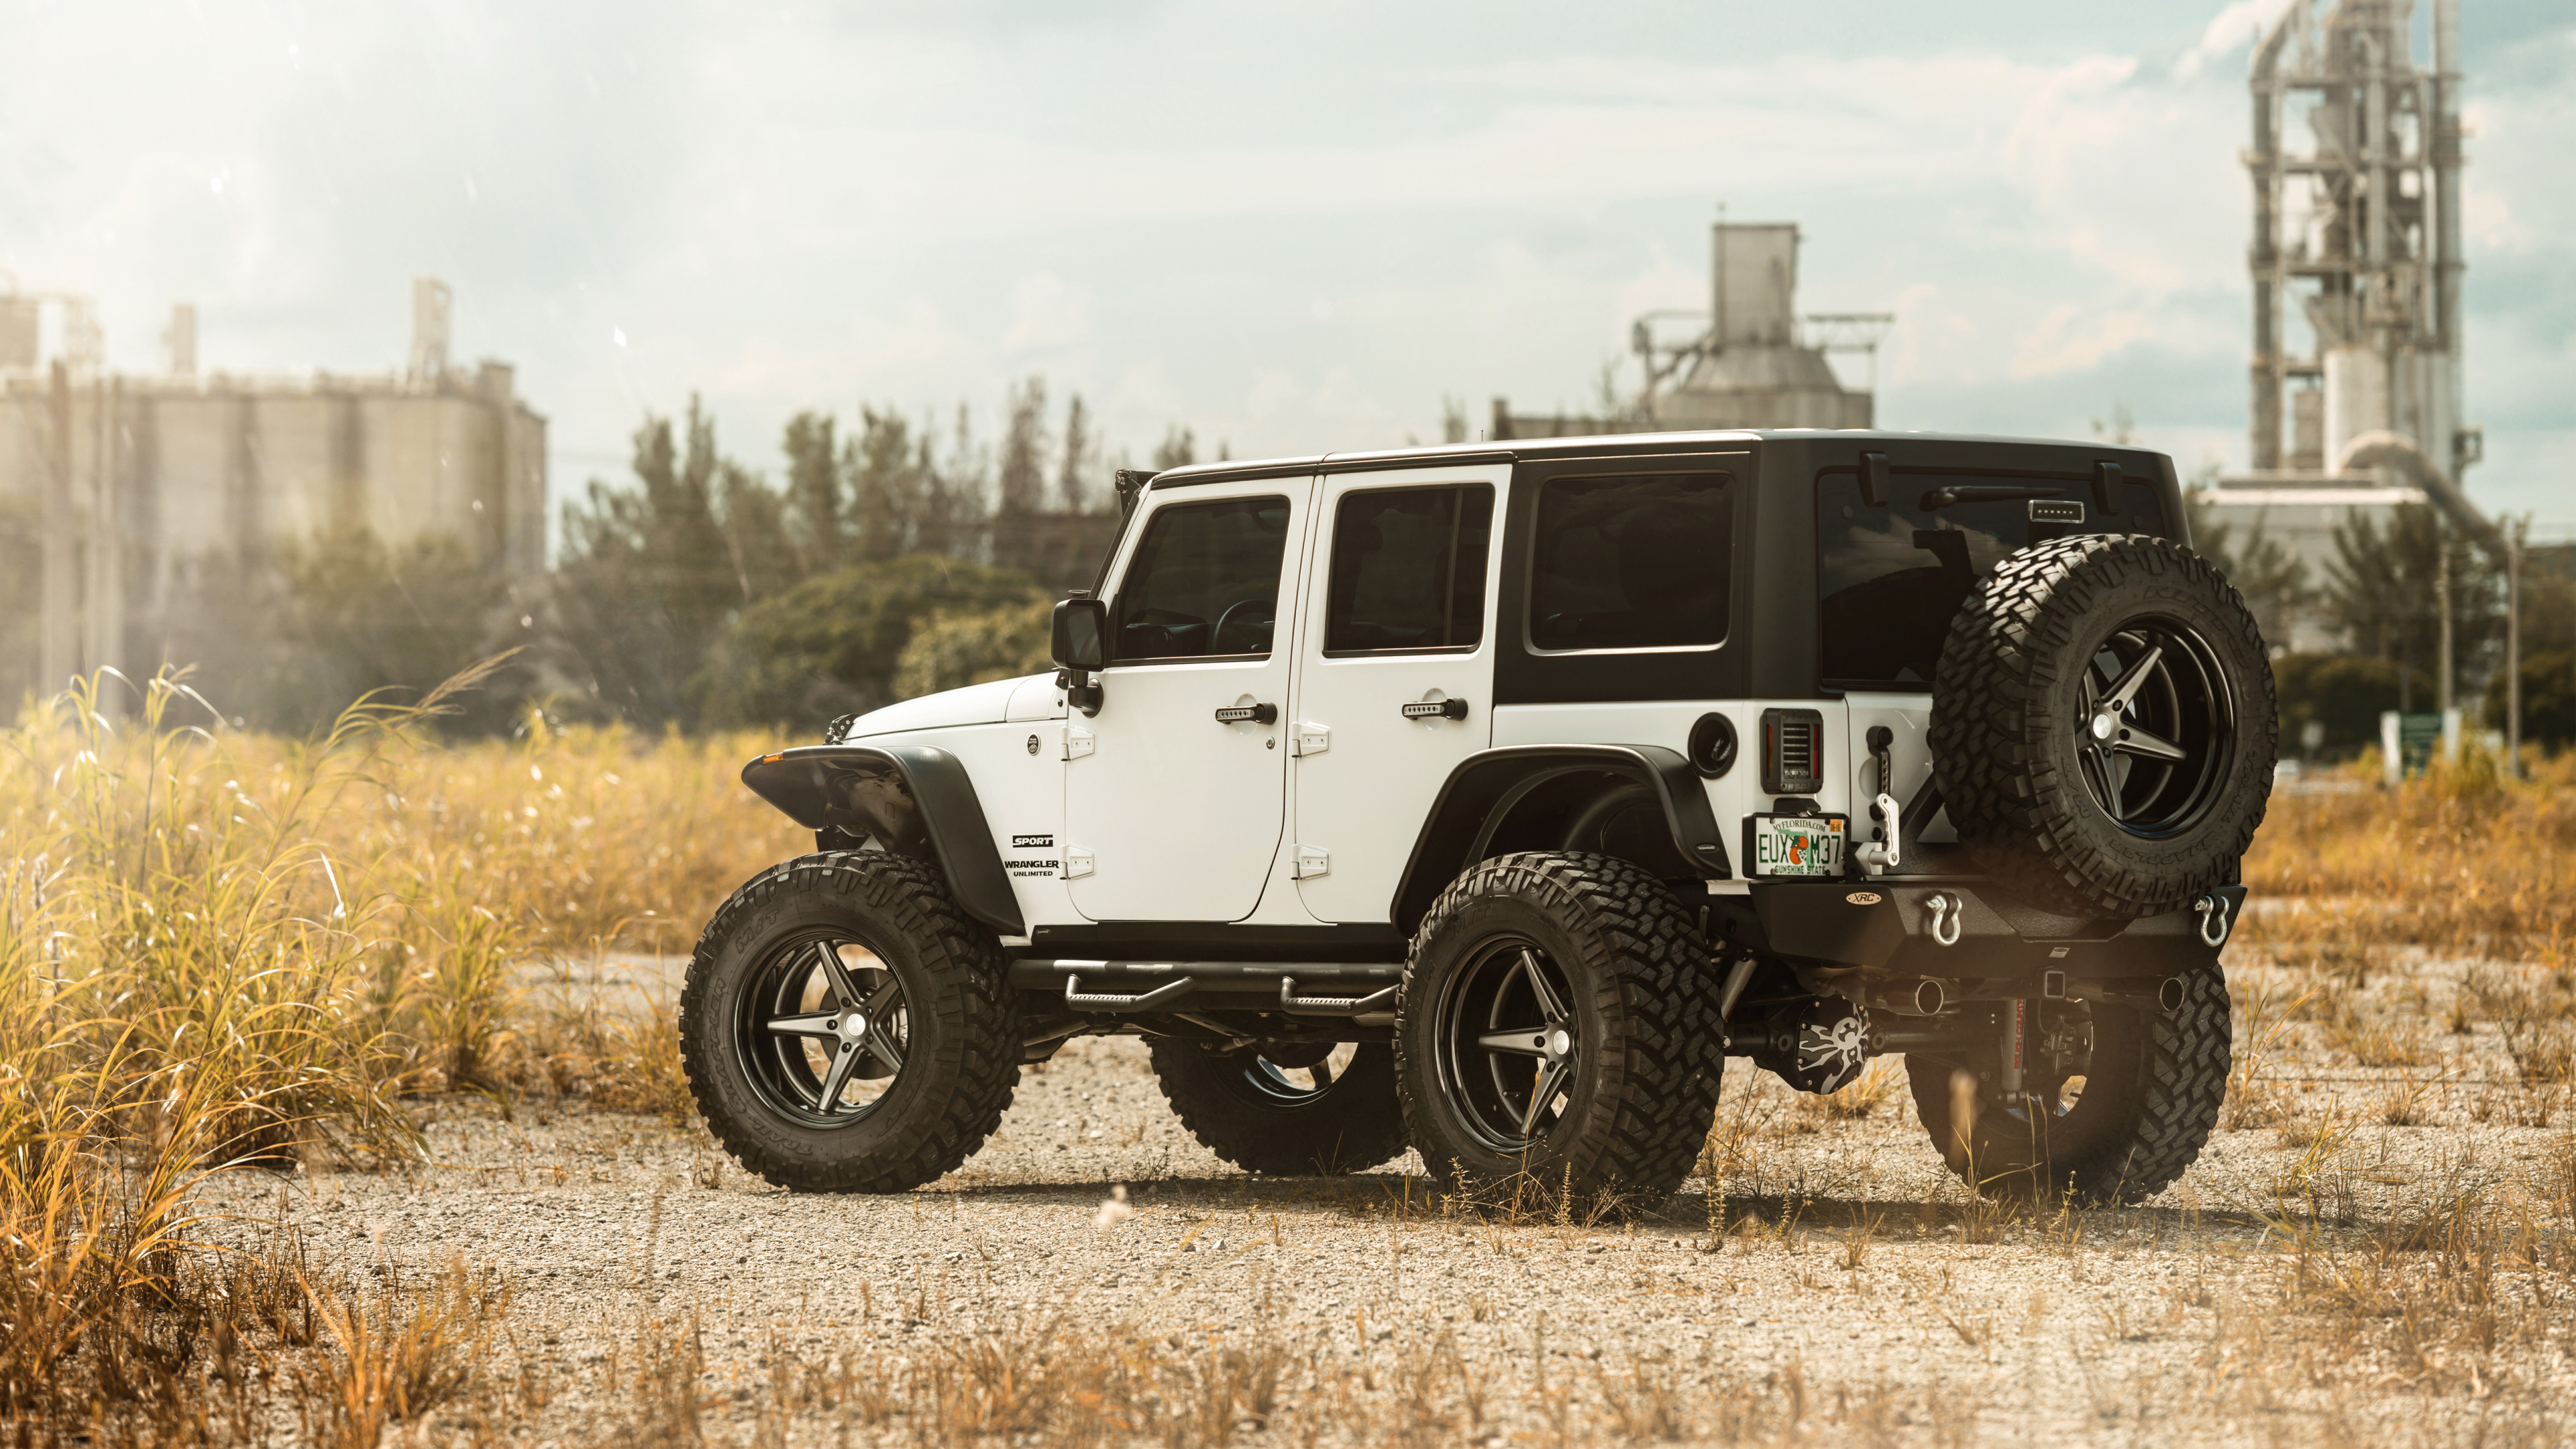 White and Black Jeep Wrangler on Brown Field During Daytime. Wallpaper in 3840x2160 Resolution